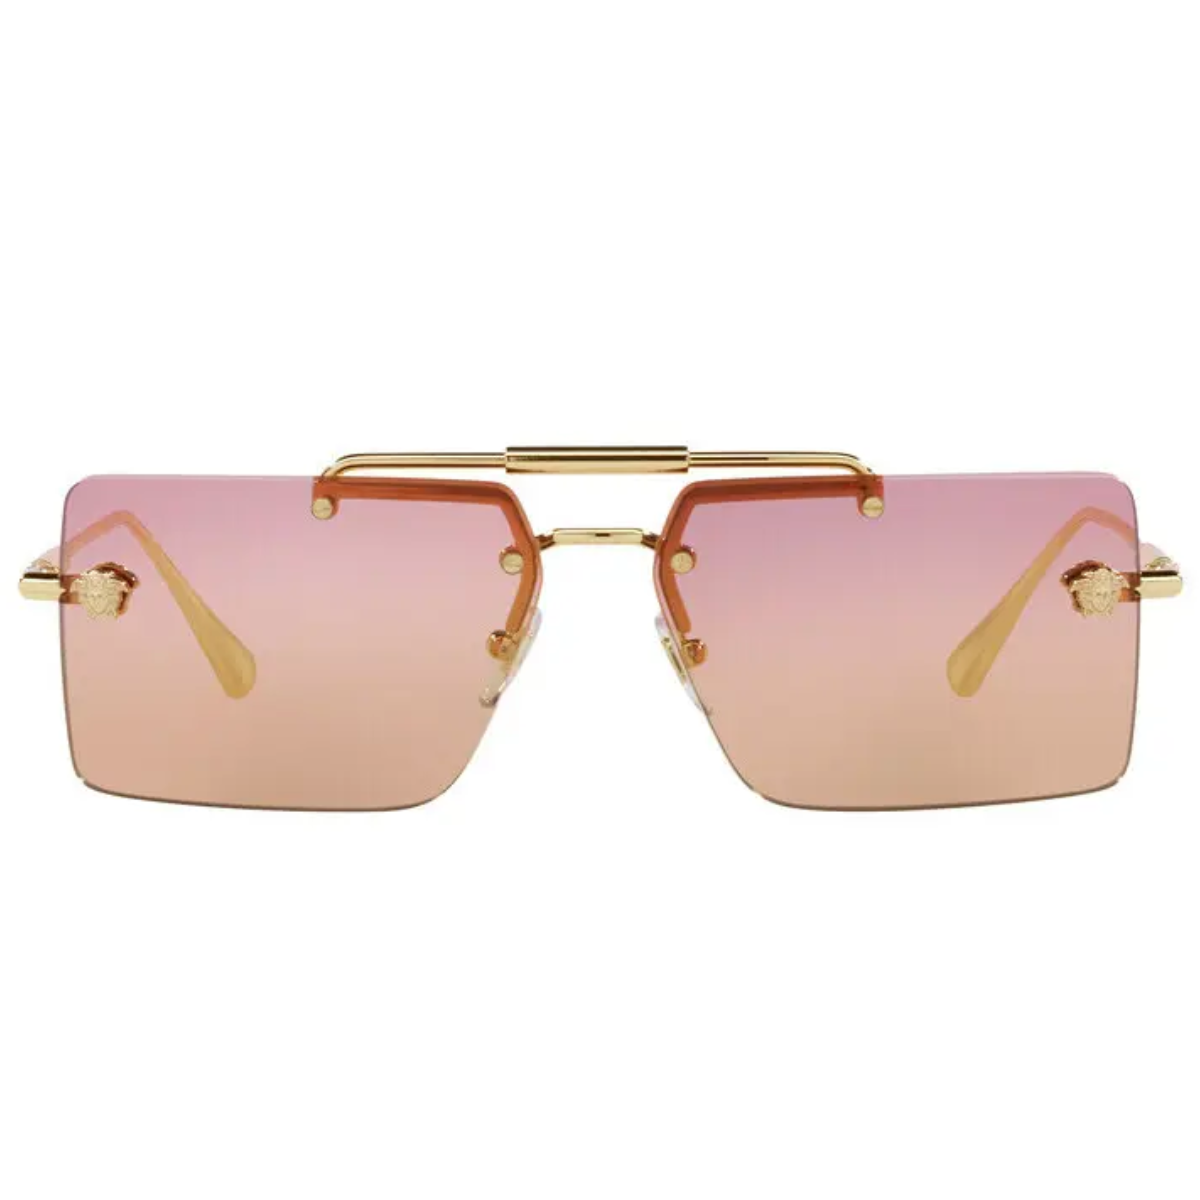 "Versace 2245 Sunglass for Women in violet and yellow. Stylish and functional eyewear at Optorium."